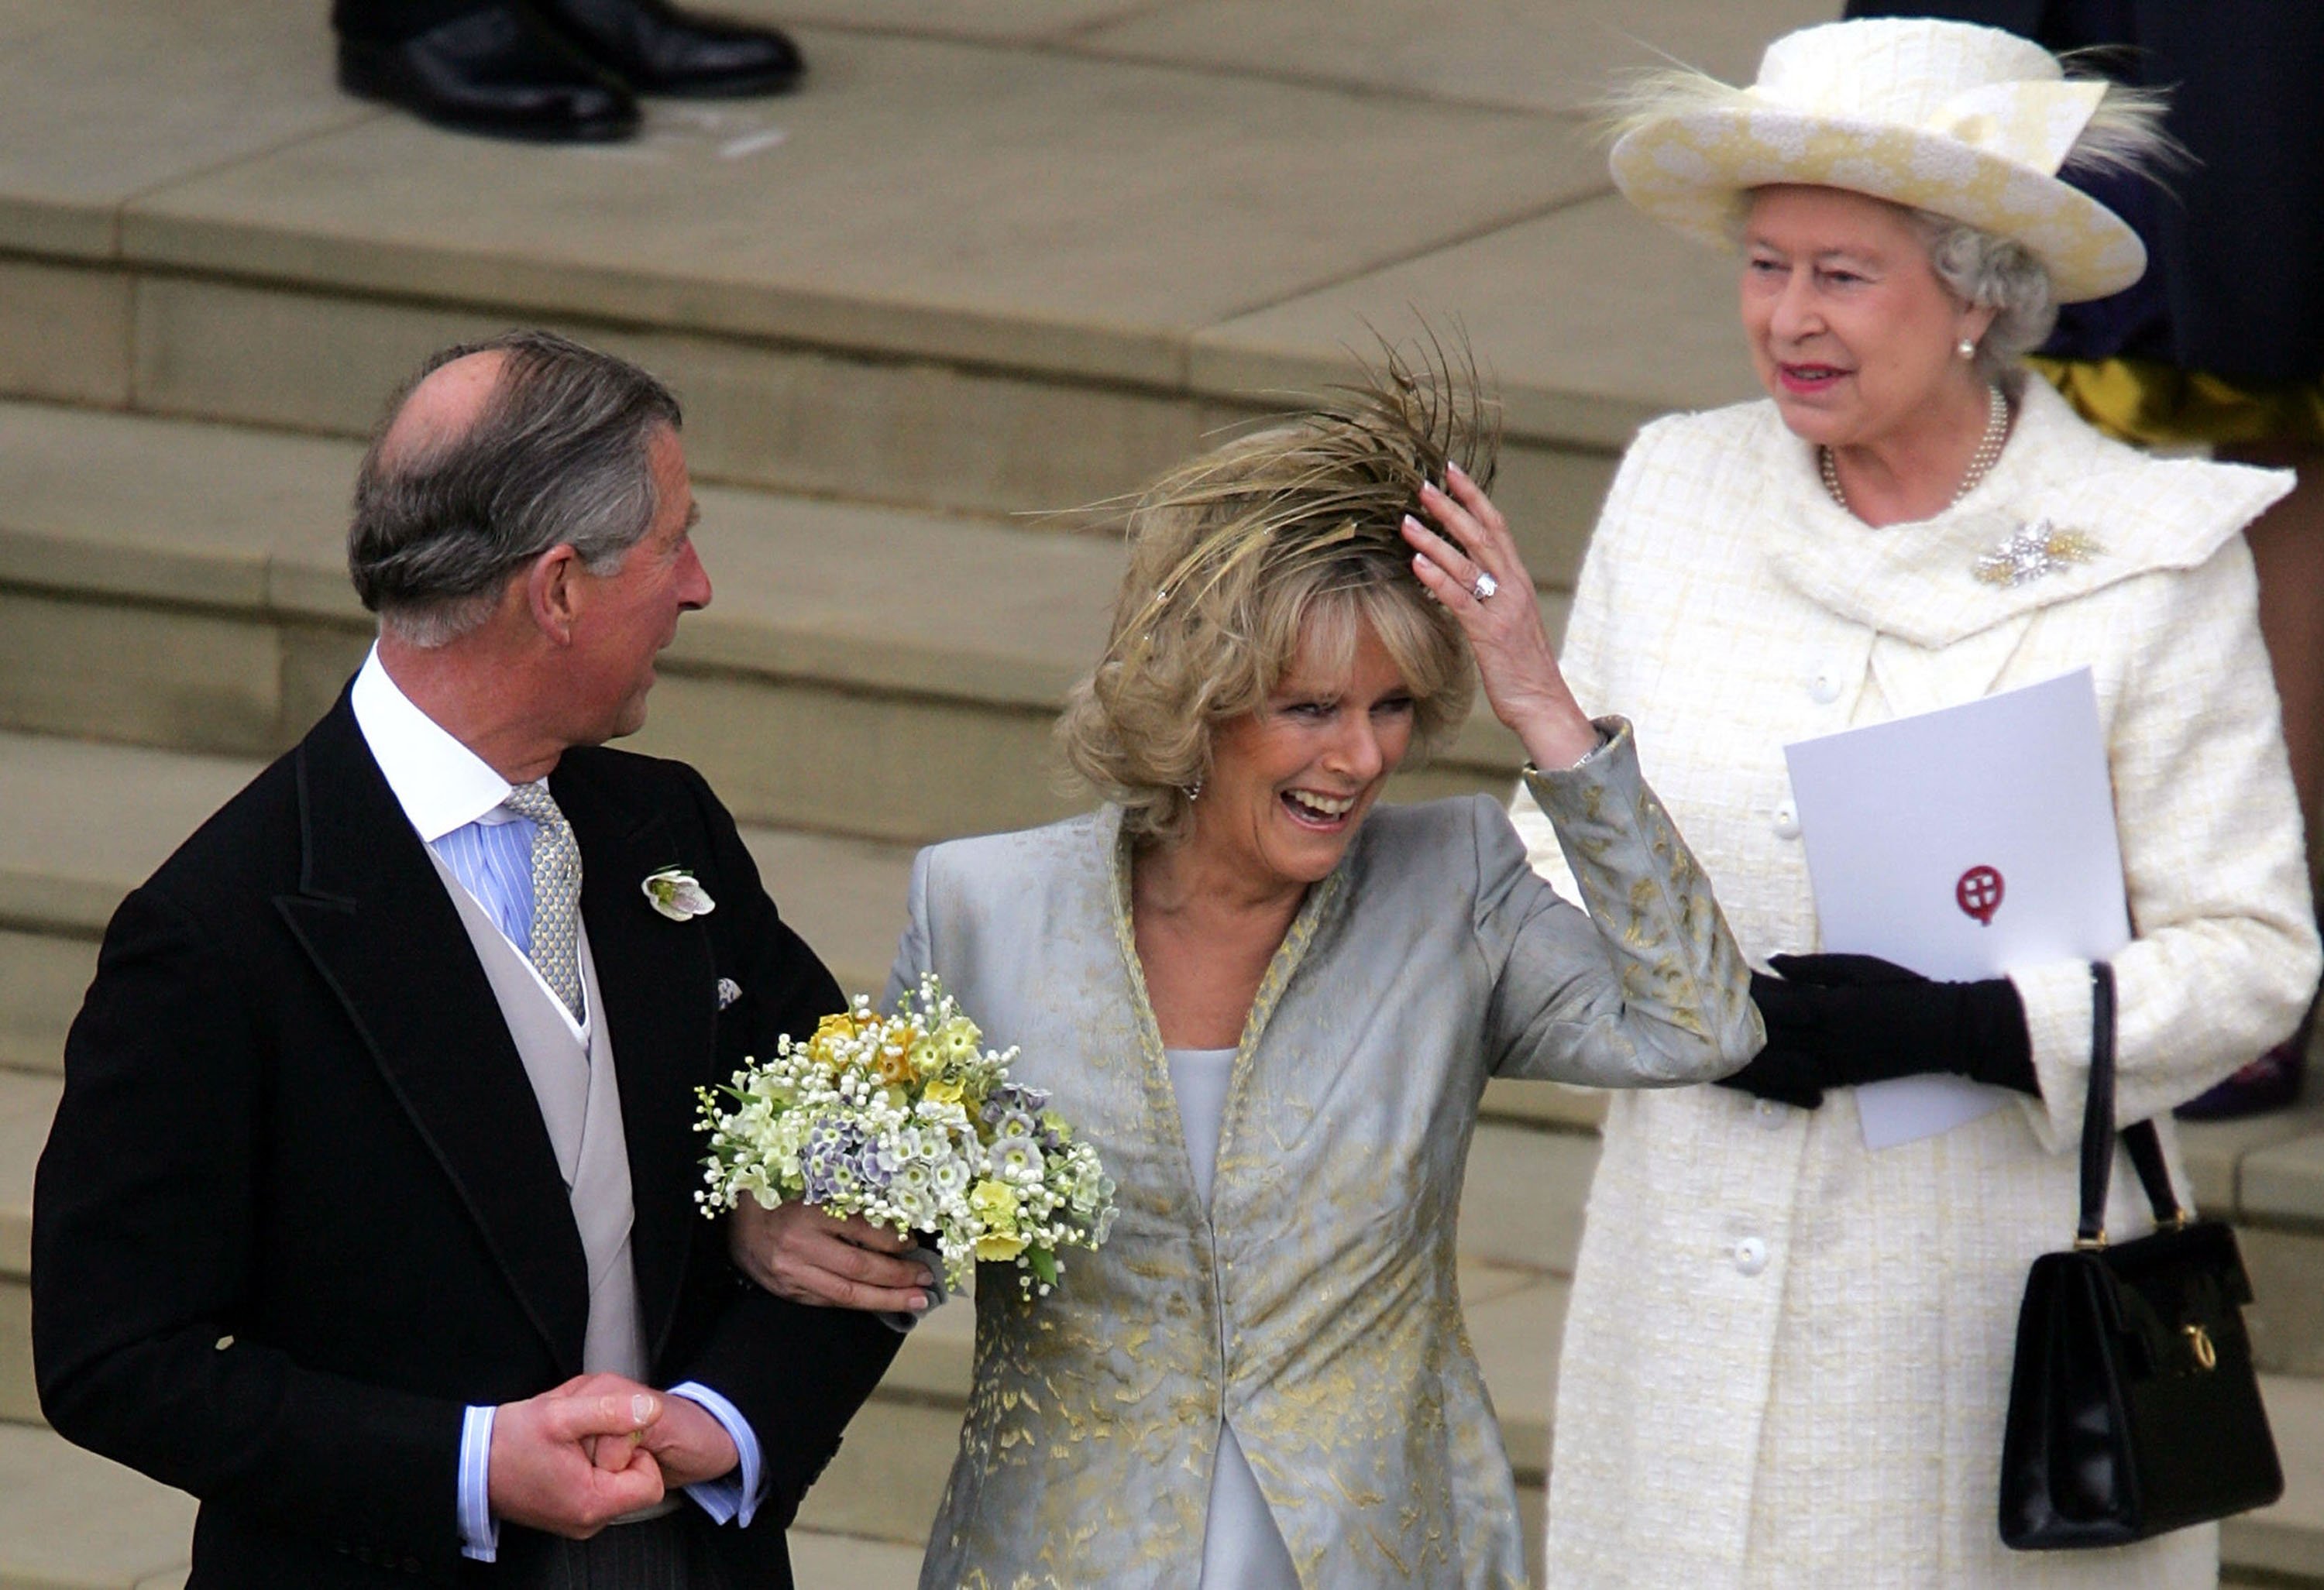 Queen Elizabeth II, Prince Charles and Duchess Camilla Parker Bowles April 9, 2005 in Berkshire, England |  Source: Getty Images 